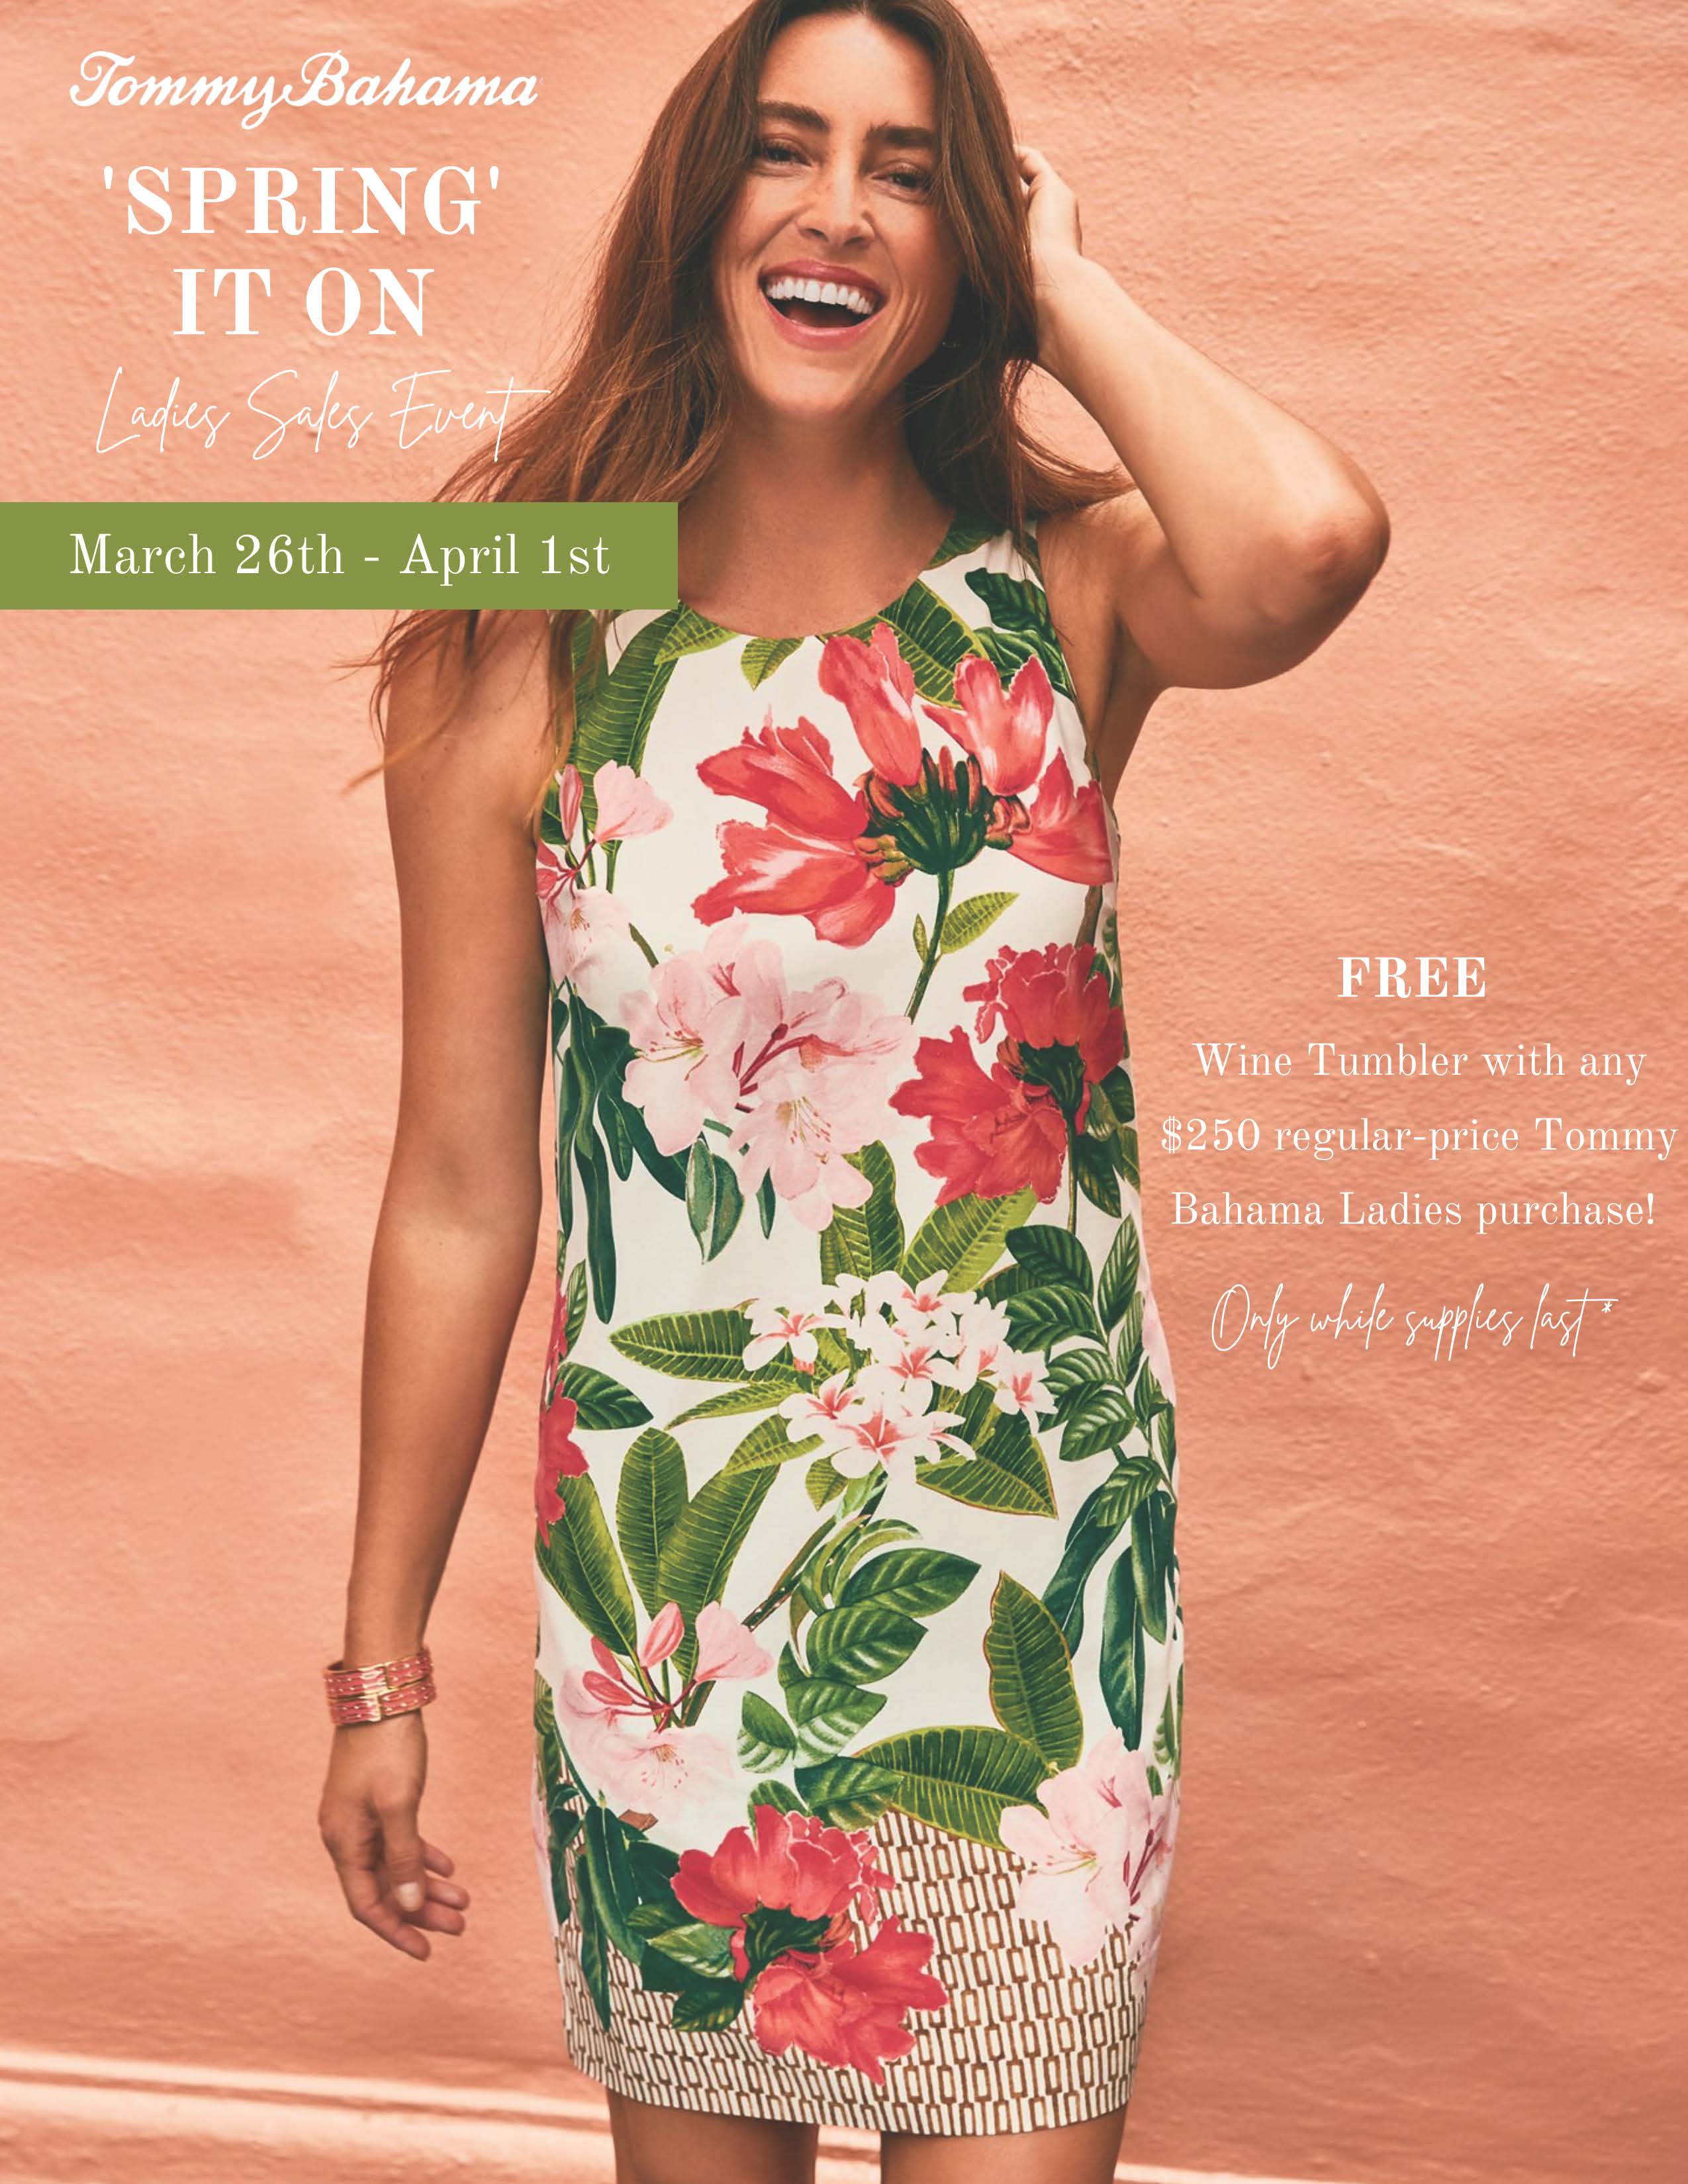 Tommy Bahama "Spring it on"